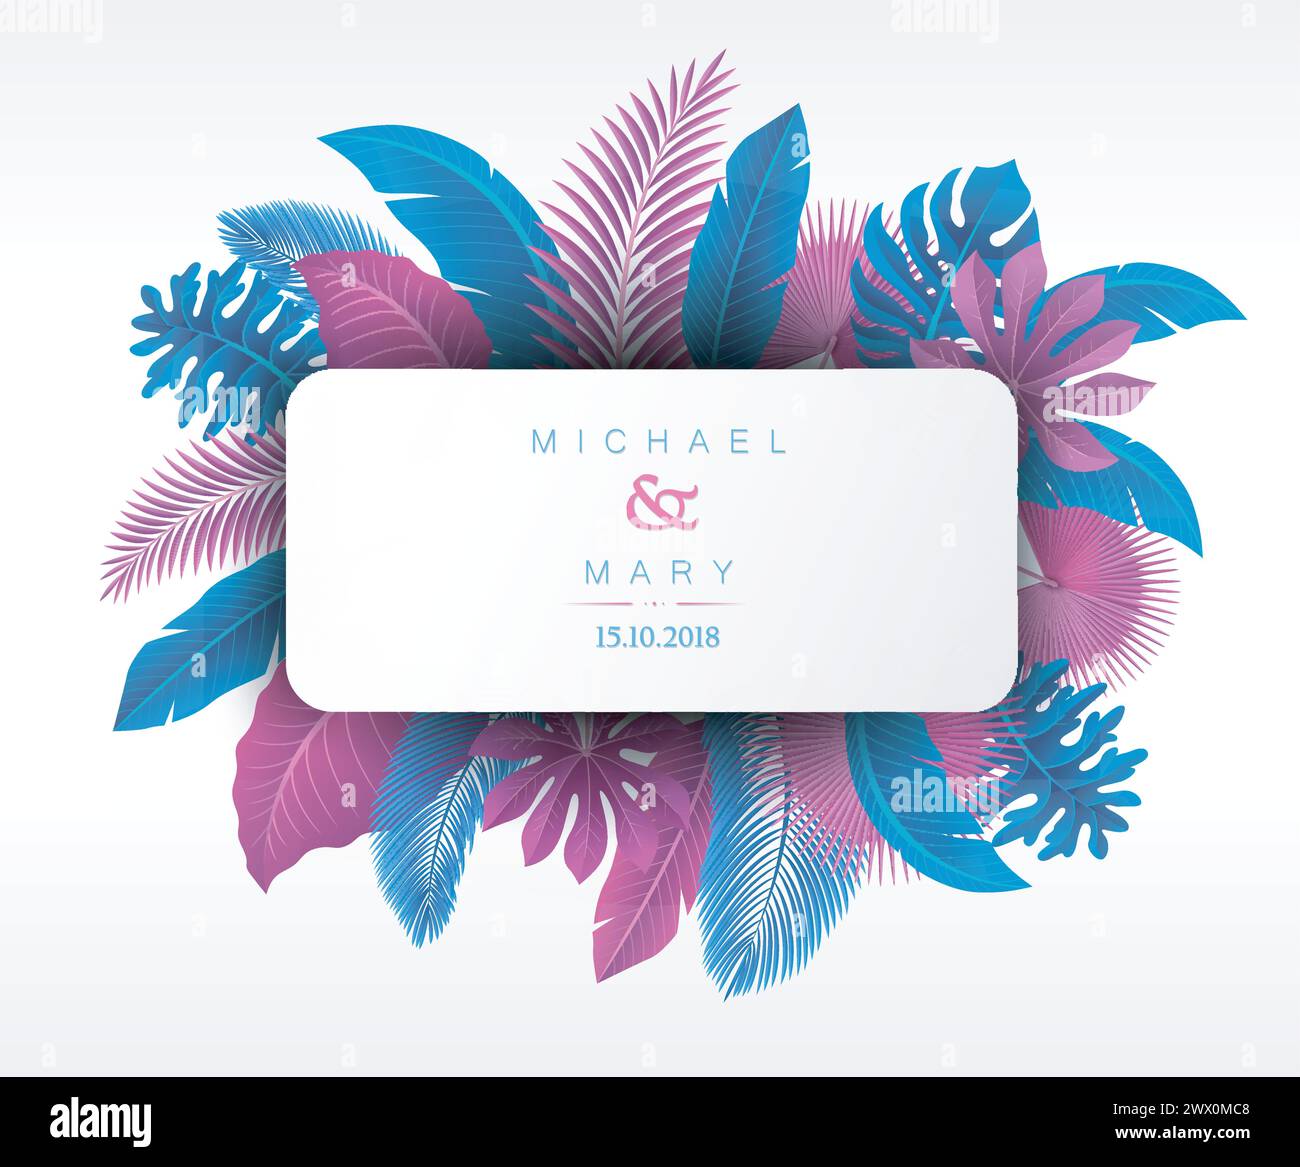 Wedding Invitation with Tropical Leaves Concept, Vector Illustration Stock Vector